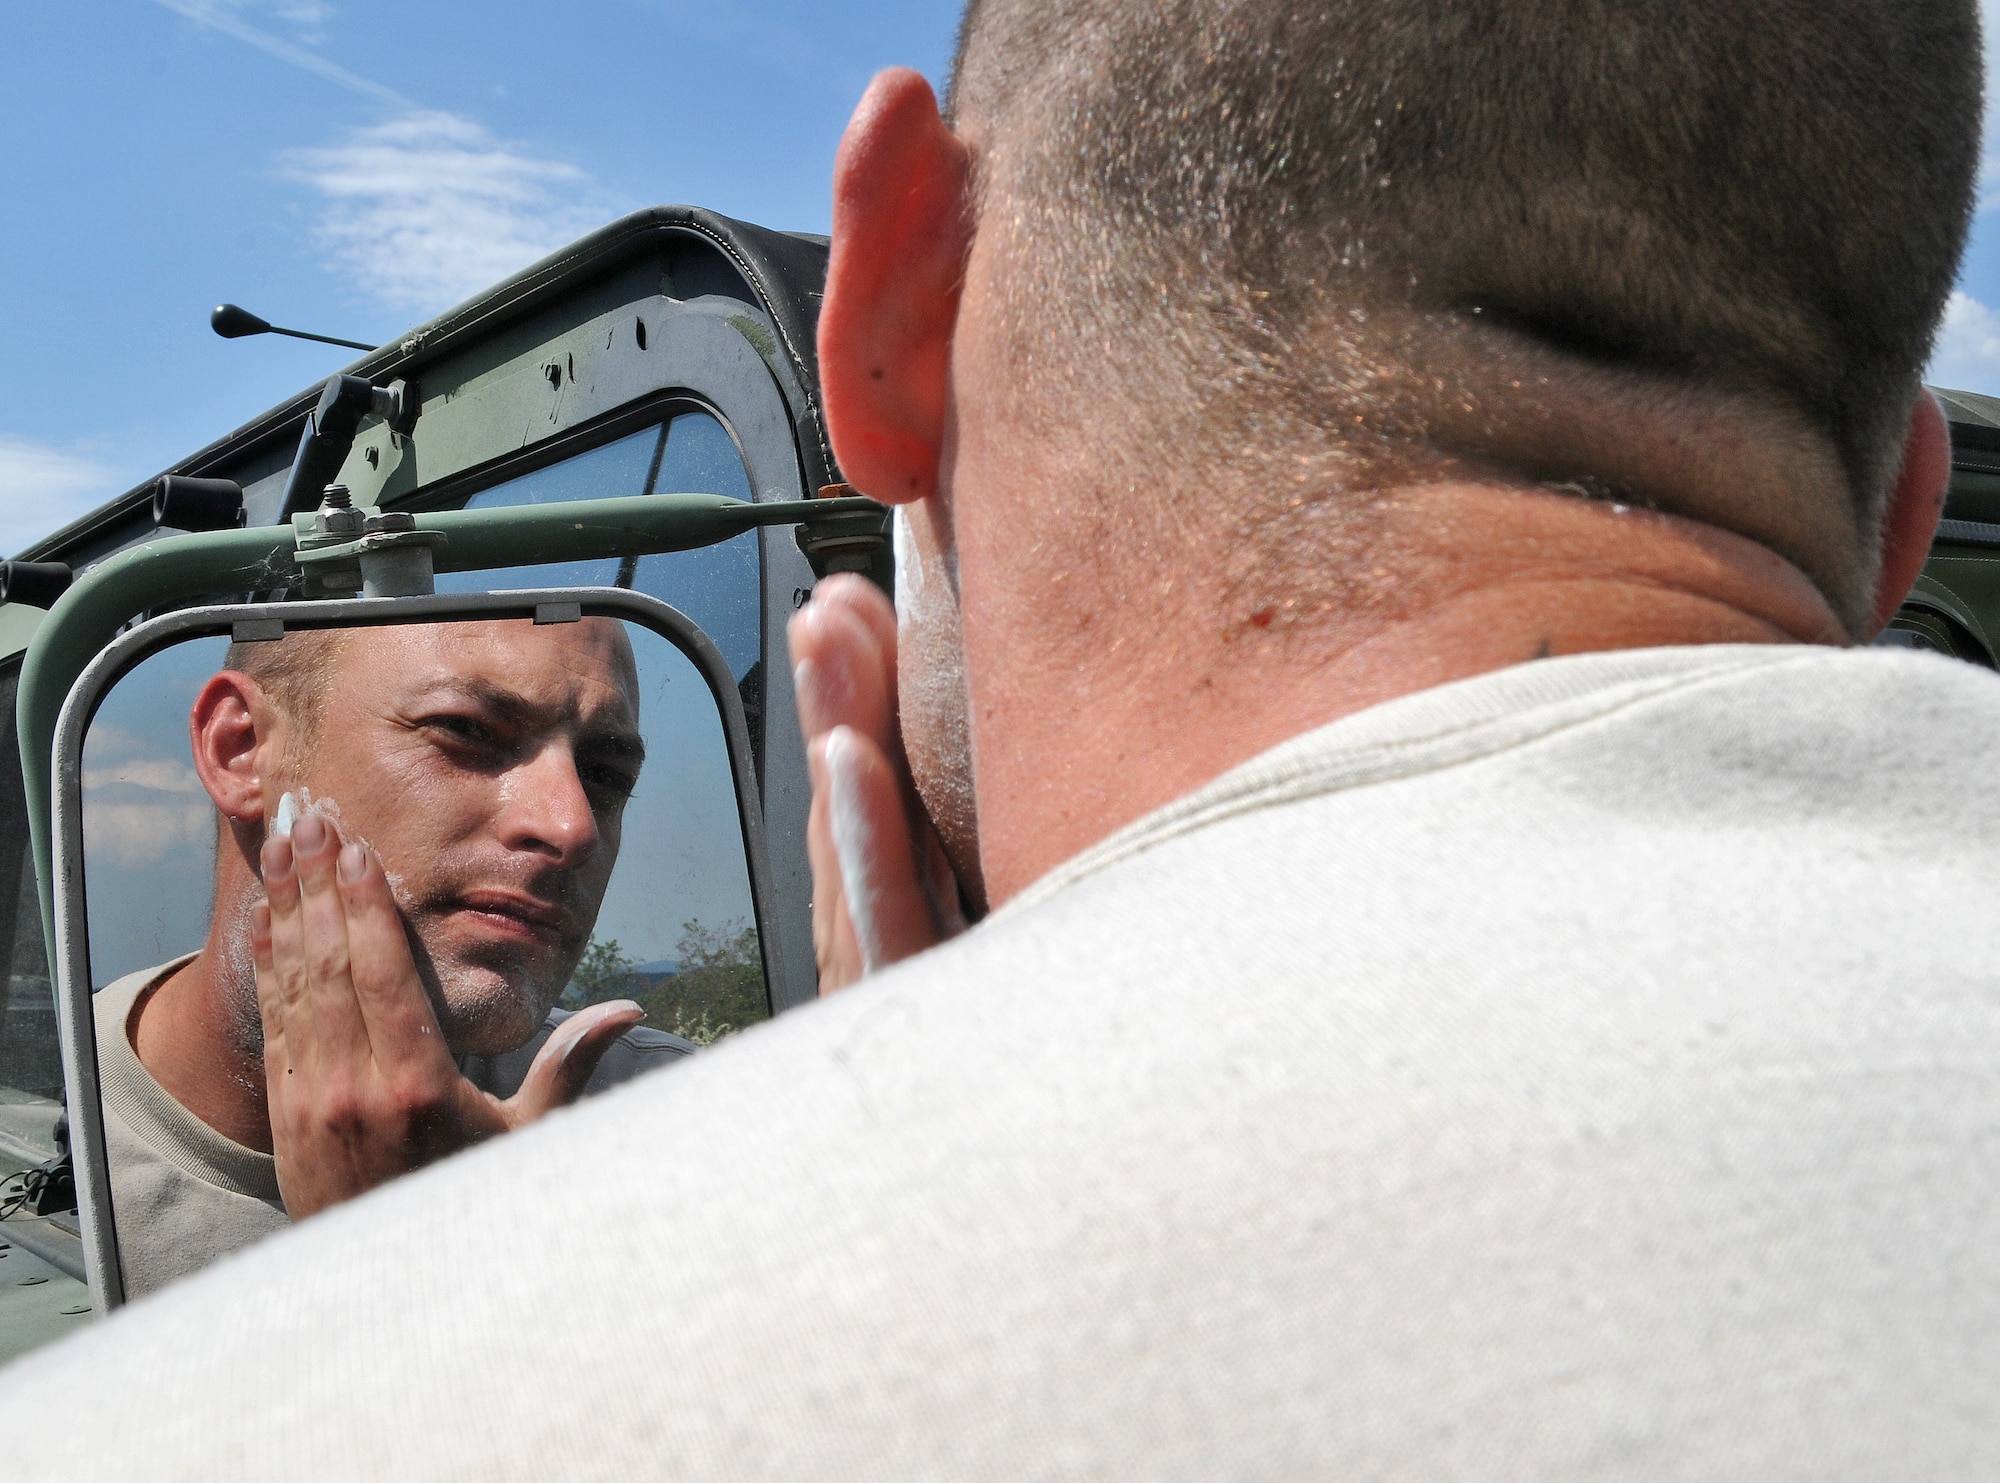 GEROLSTEIN, Germany – Staff Sgt. Dustin Smith, 606th Air Control Squadron power production journeyman, shaves using the side view mirror of a Humvee while participating in exercise Eifel Thunder 2011 here May 10. The 606th ACS participated in a field exercise that tested their ability to deploy and set up a deployed radar and satellite communications site as well as everything else required to accomplish their mission. The squadron returned to Spangdahlem Air Base May 16. (U.S. Air Force photo/Senior Airman Nick Wilson)